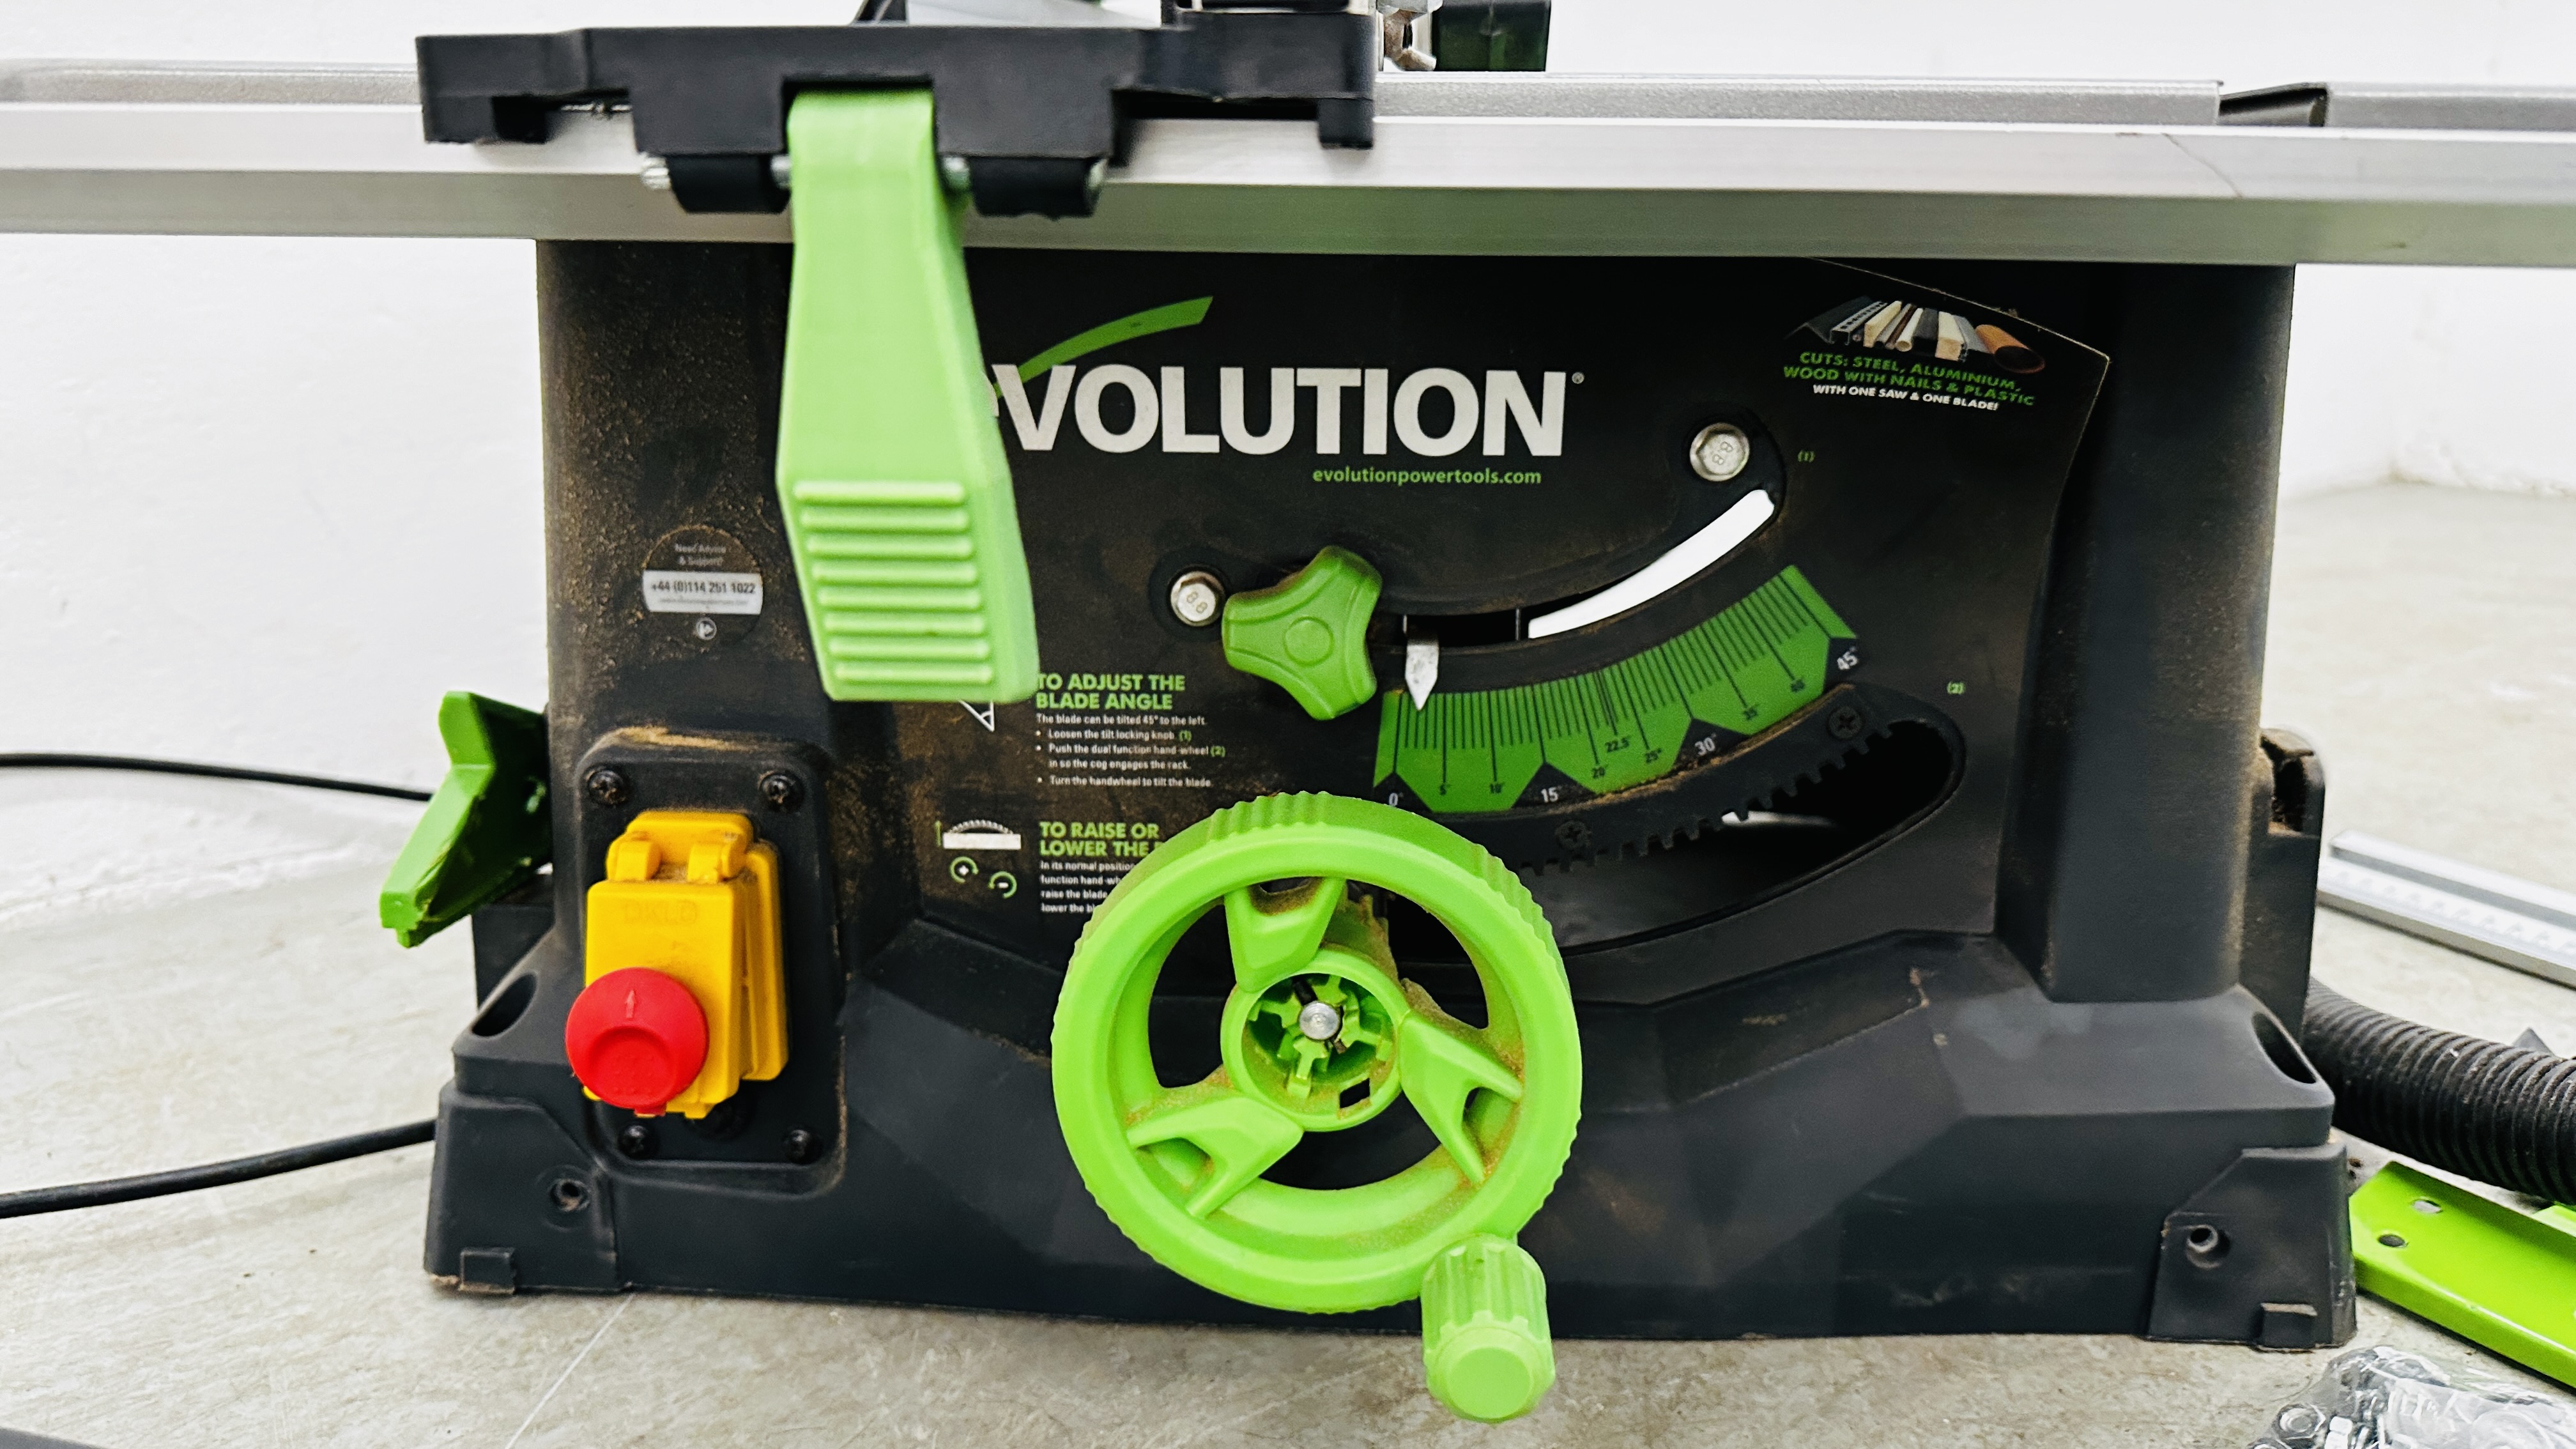 EVOLUTION TABLE SAW - SOLD AS SEEN. - Image 2 of 9